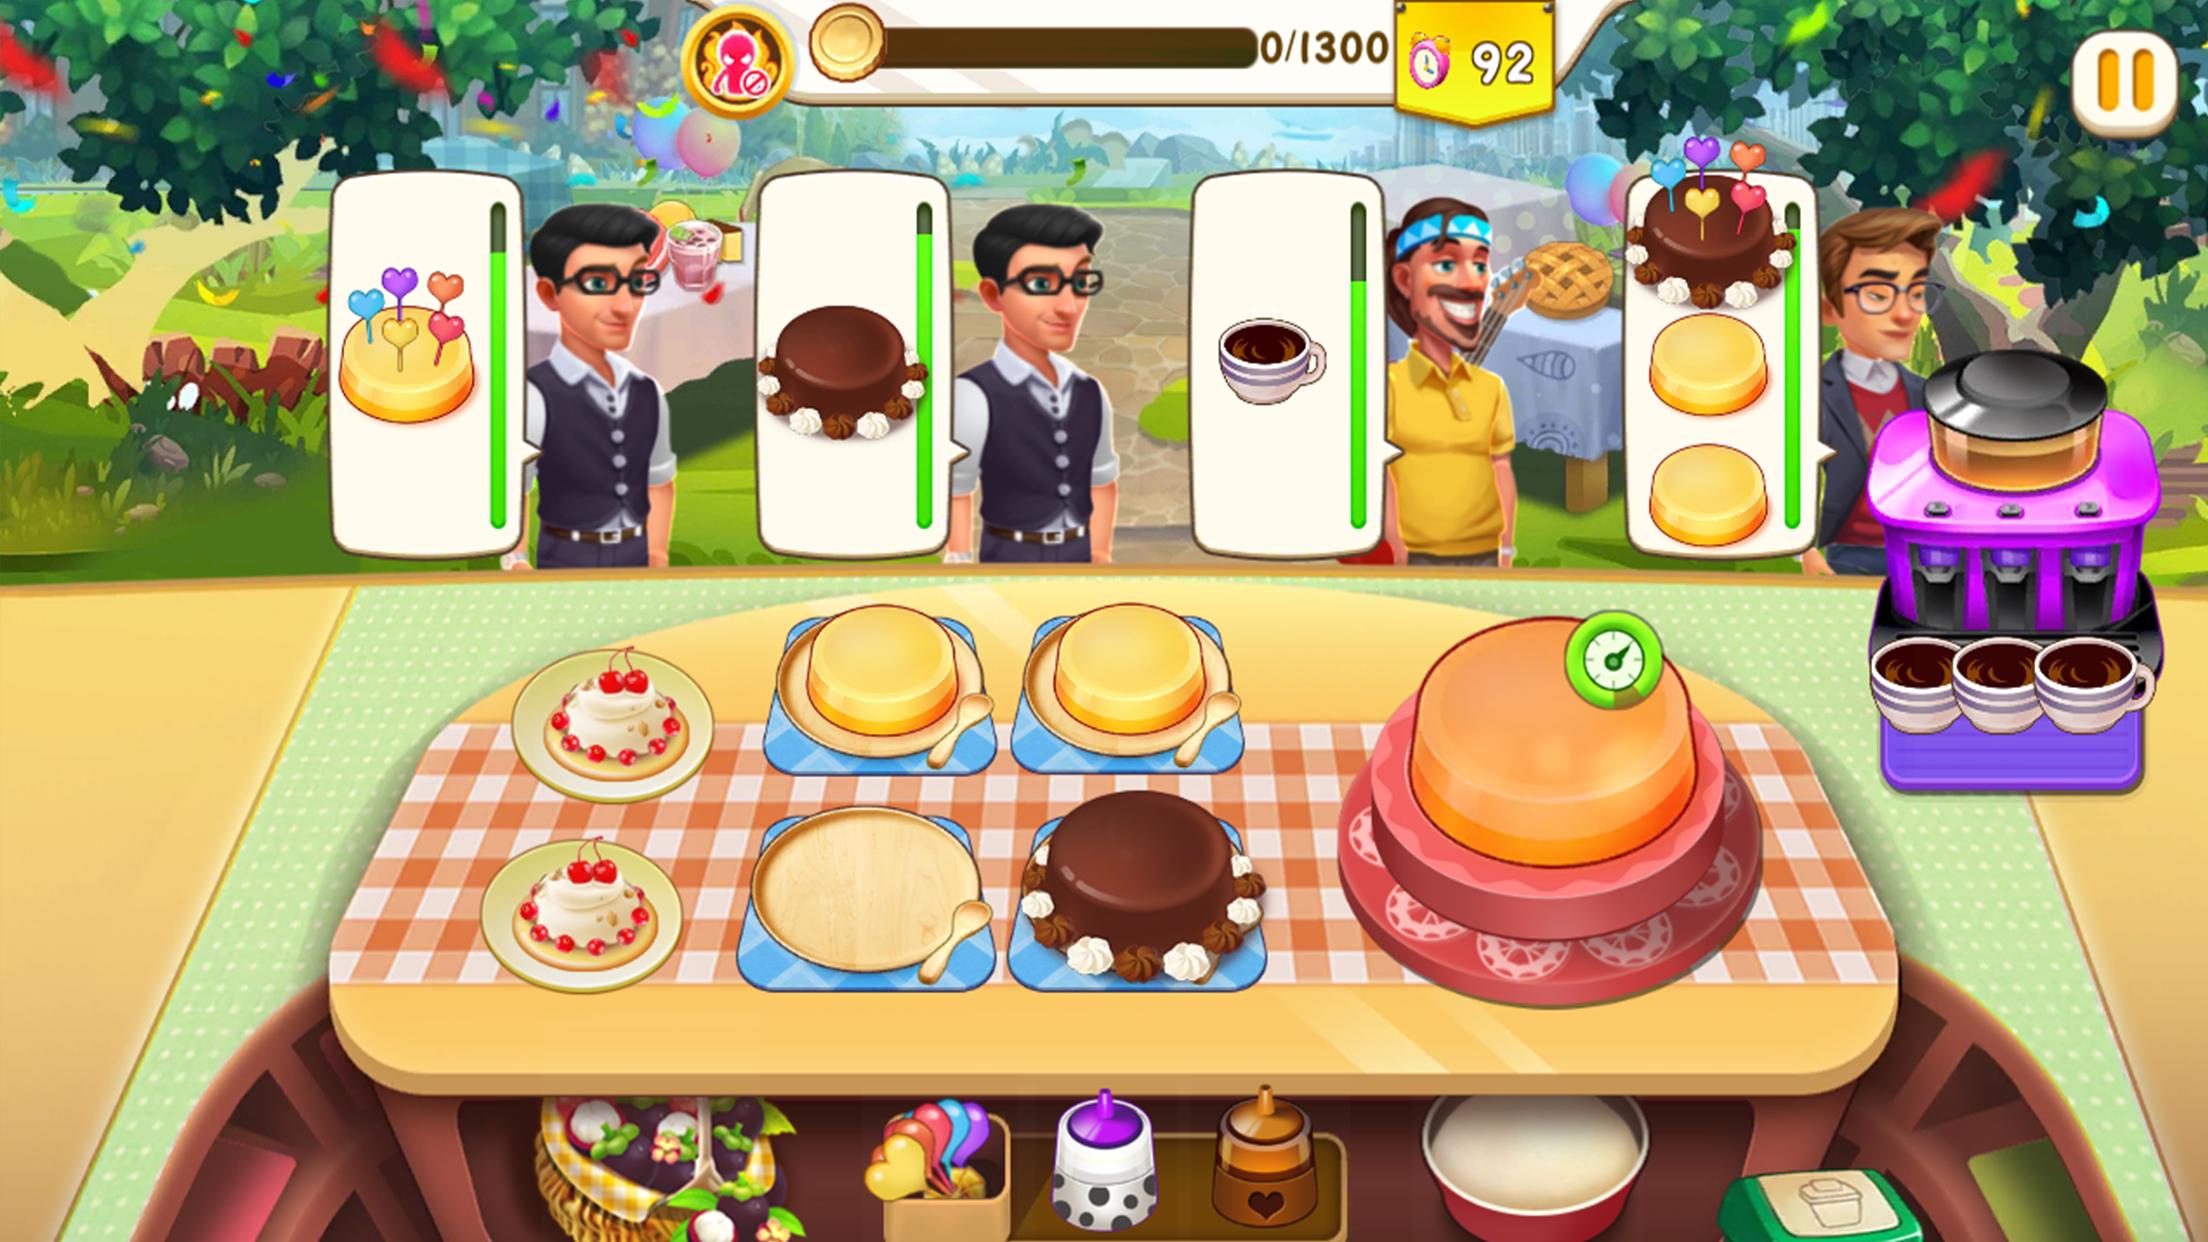 Cooking Rush Bake it to delicious 2.1.2 Screenshot 12